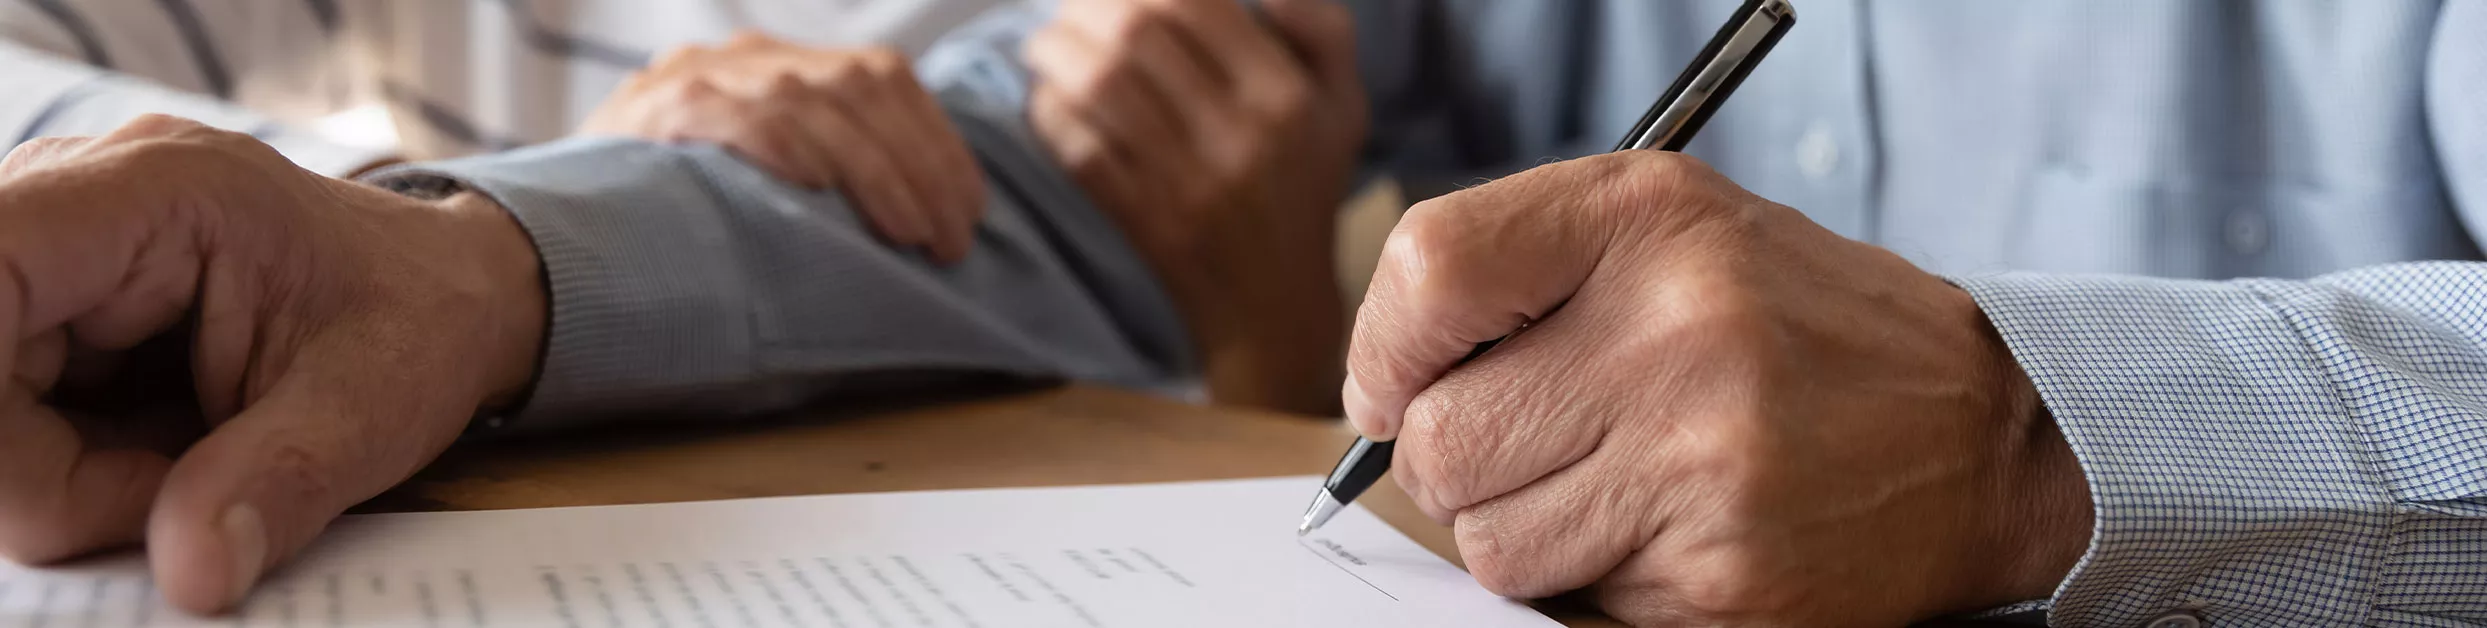 an older woman's hands wrapped around and older man's arm while he signs a paper